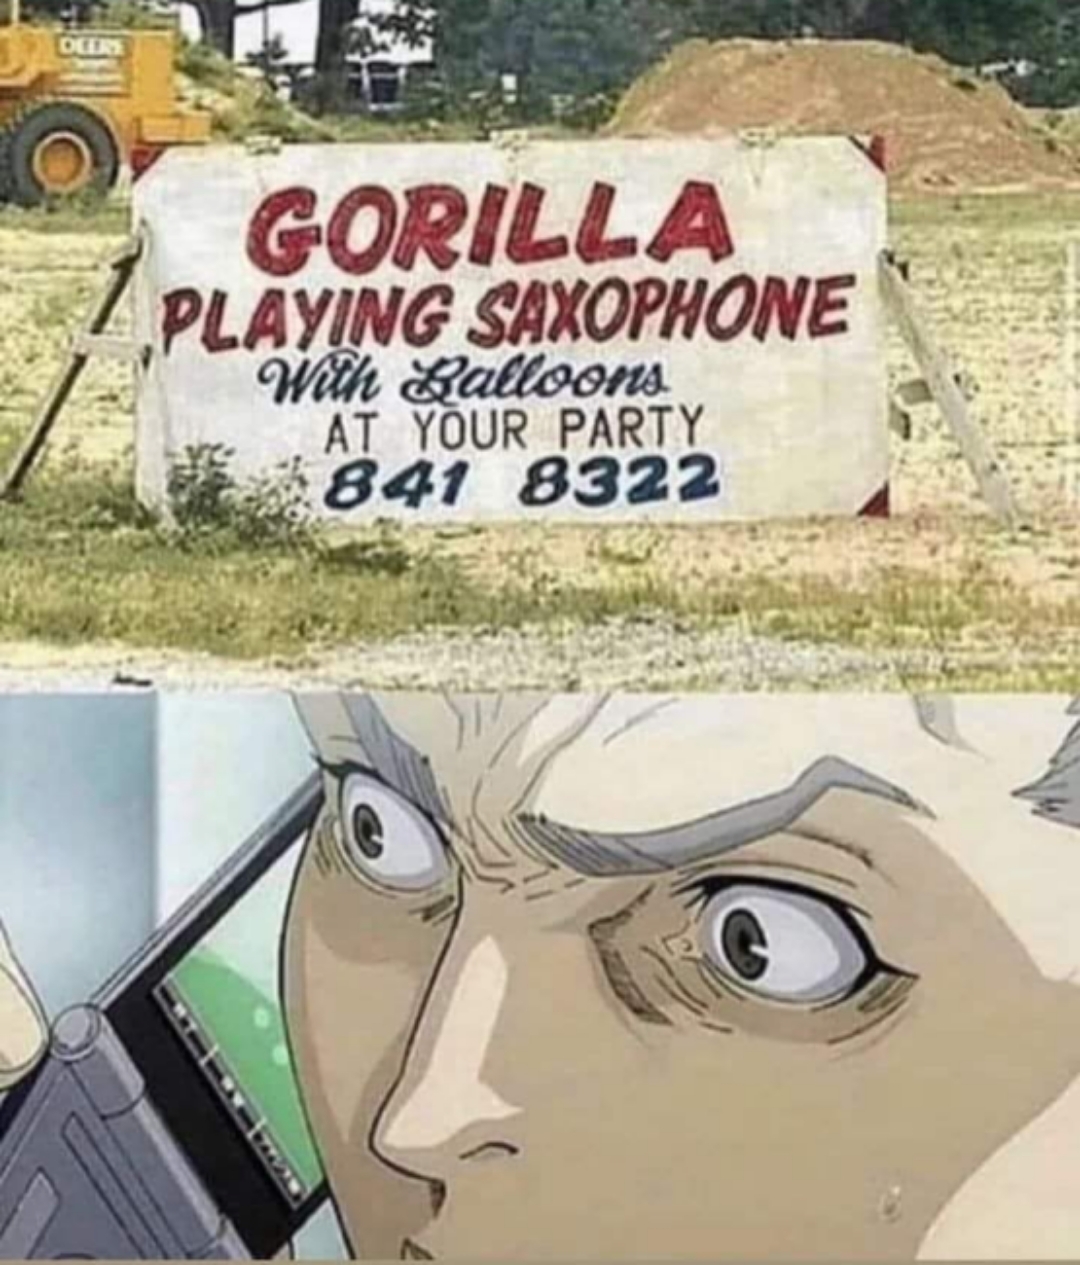 dank memes - gorilla playing saxophone with balloons meme - Oler Gorilla Playing Saxophone With Balloons At Your Party 841 8322